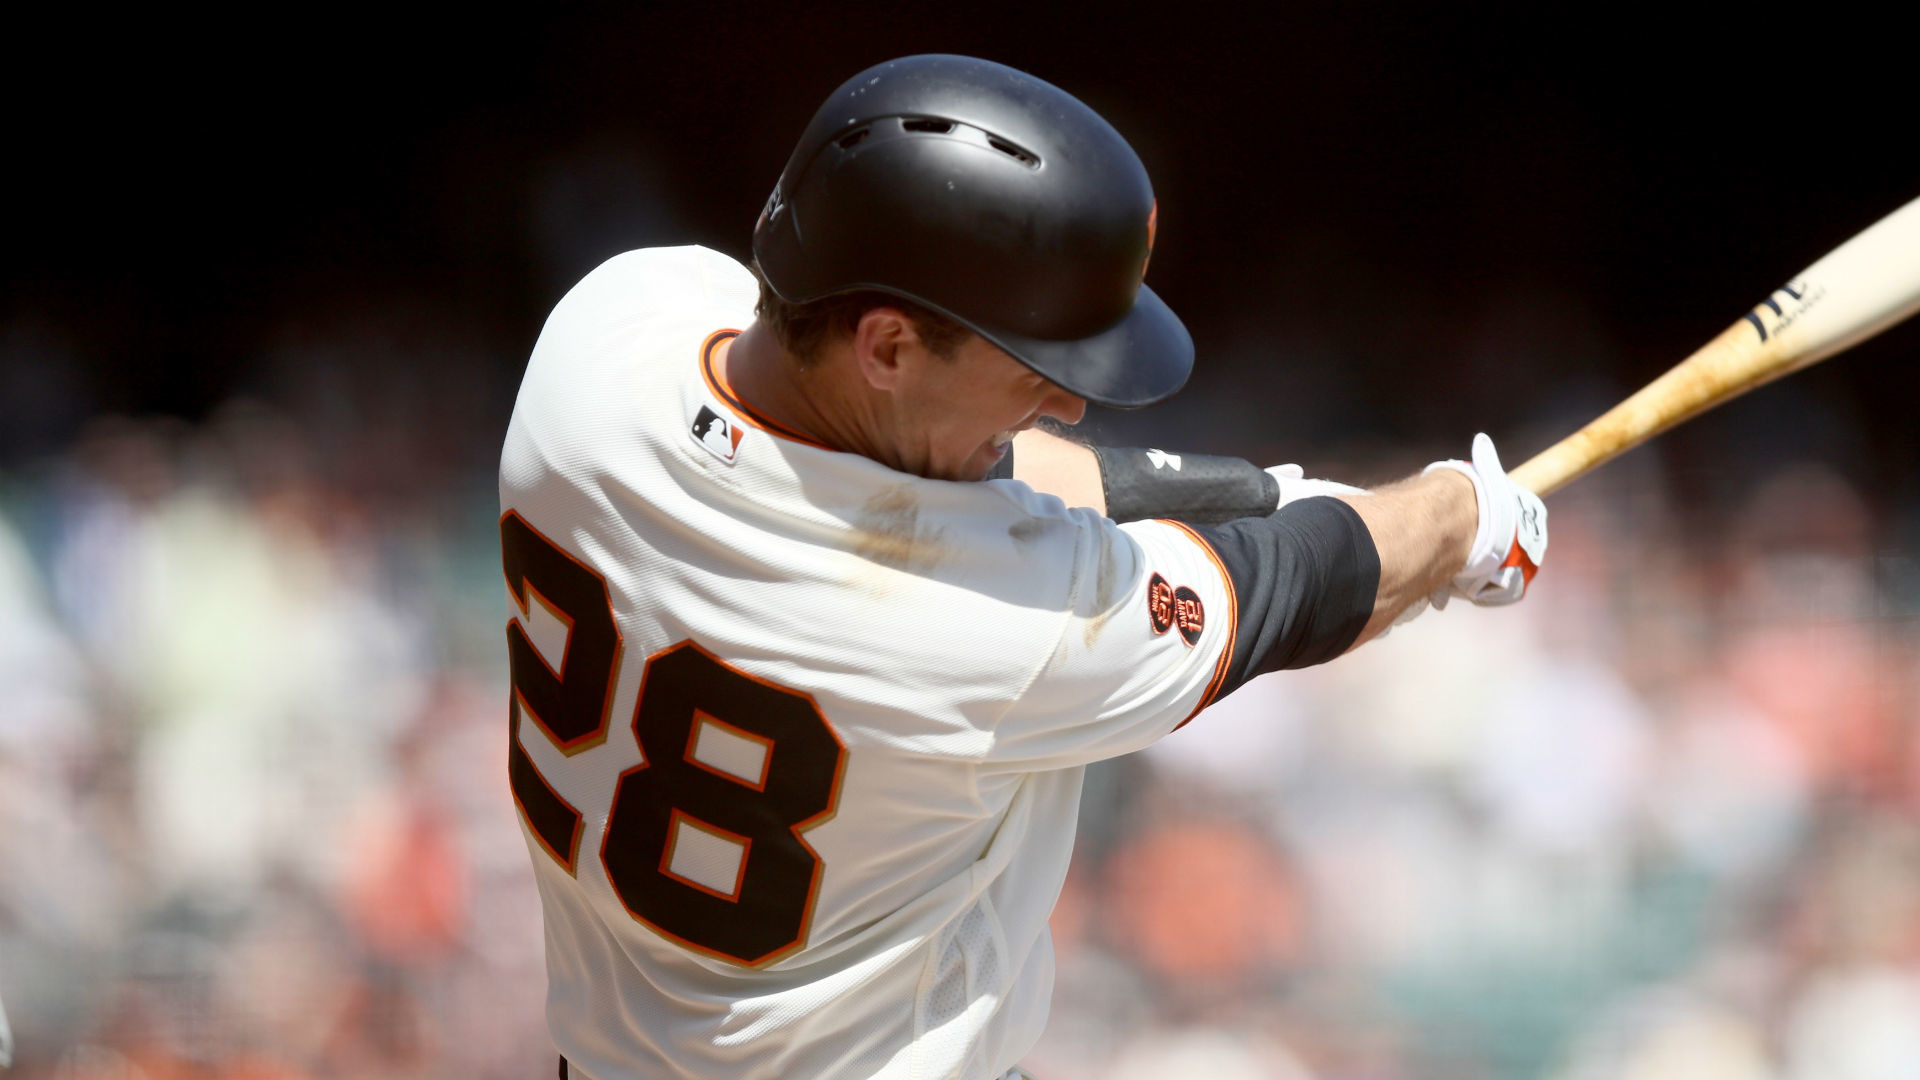 1920x1080 Giants activate Buster Posey from 7-day concussion DL | MLB | Sporting News